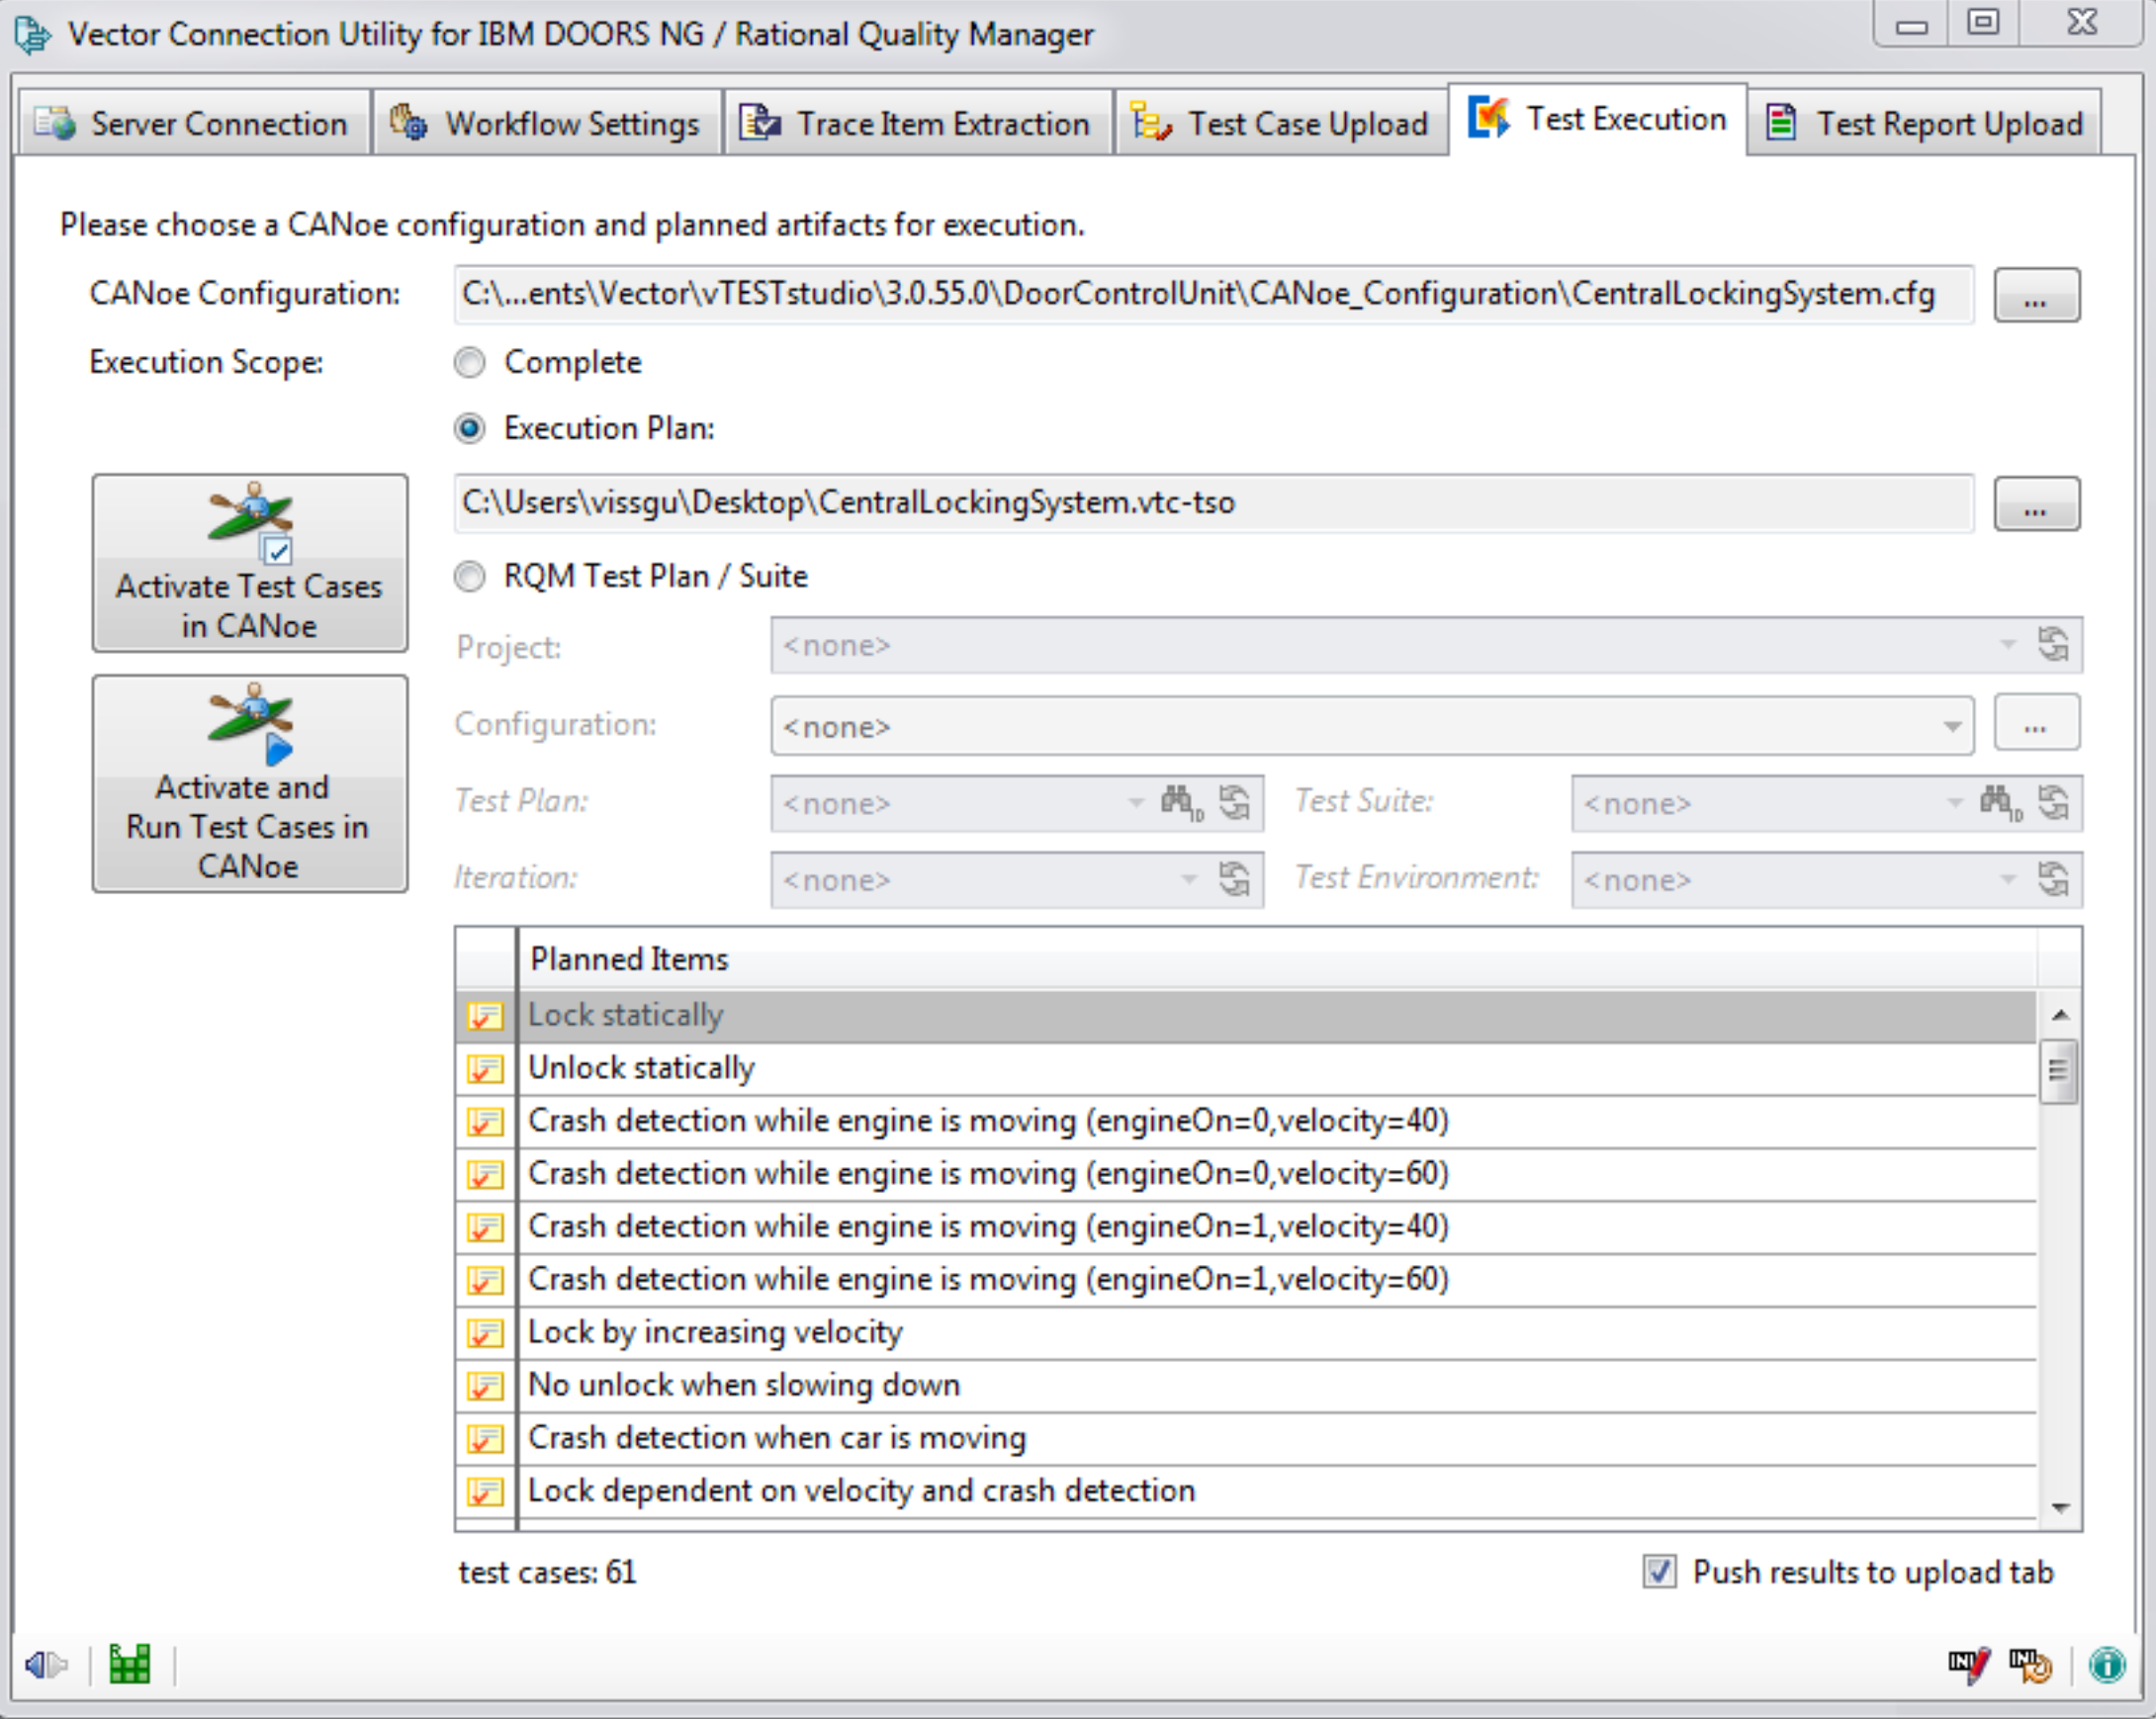 In test execution, choose the execution scope, see planned items and test cases and interact with them